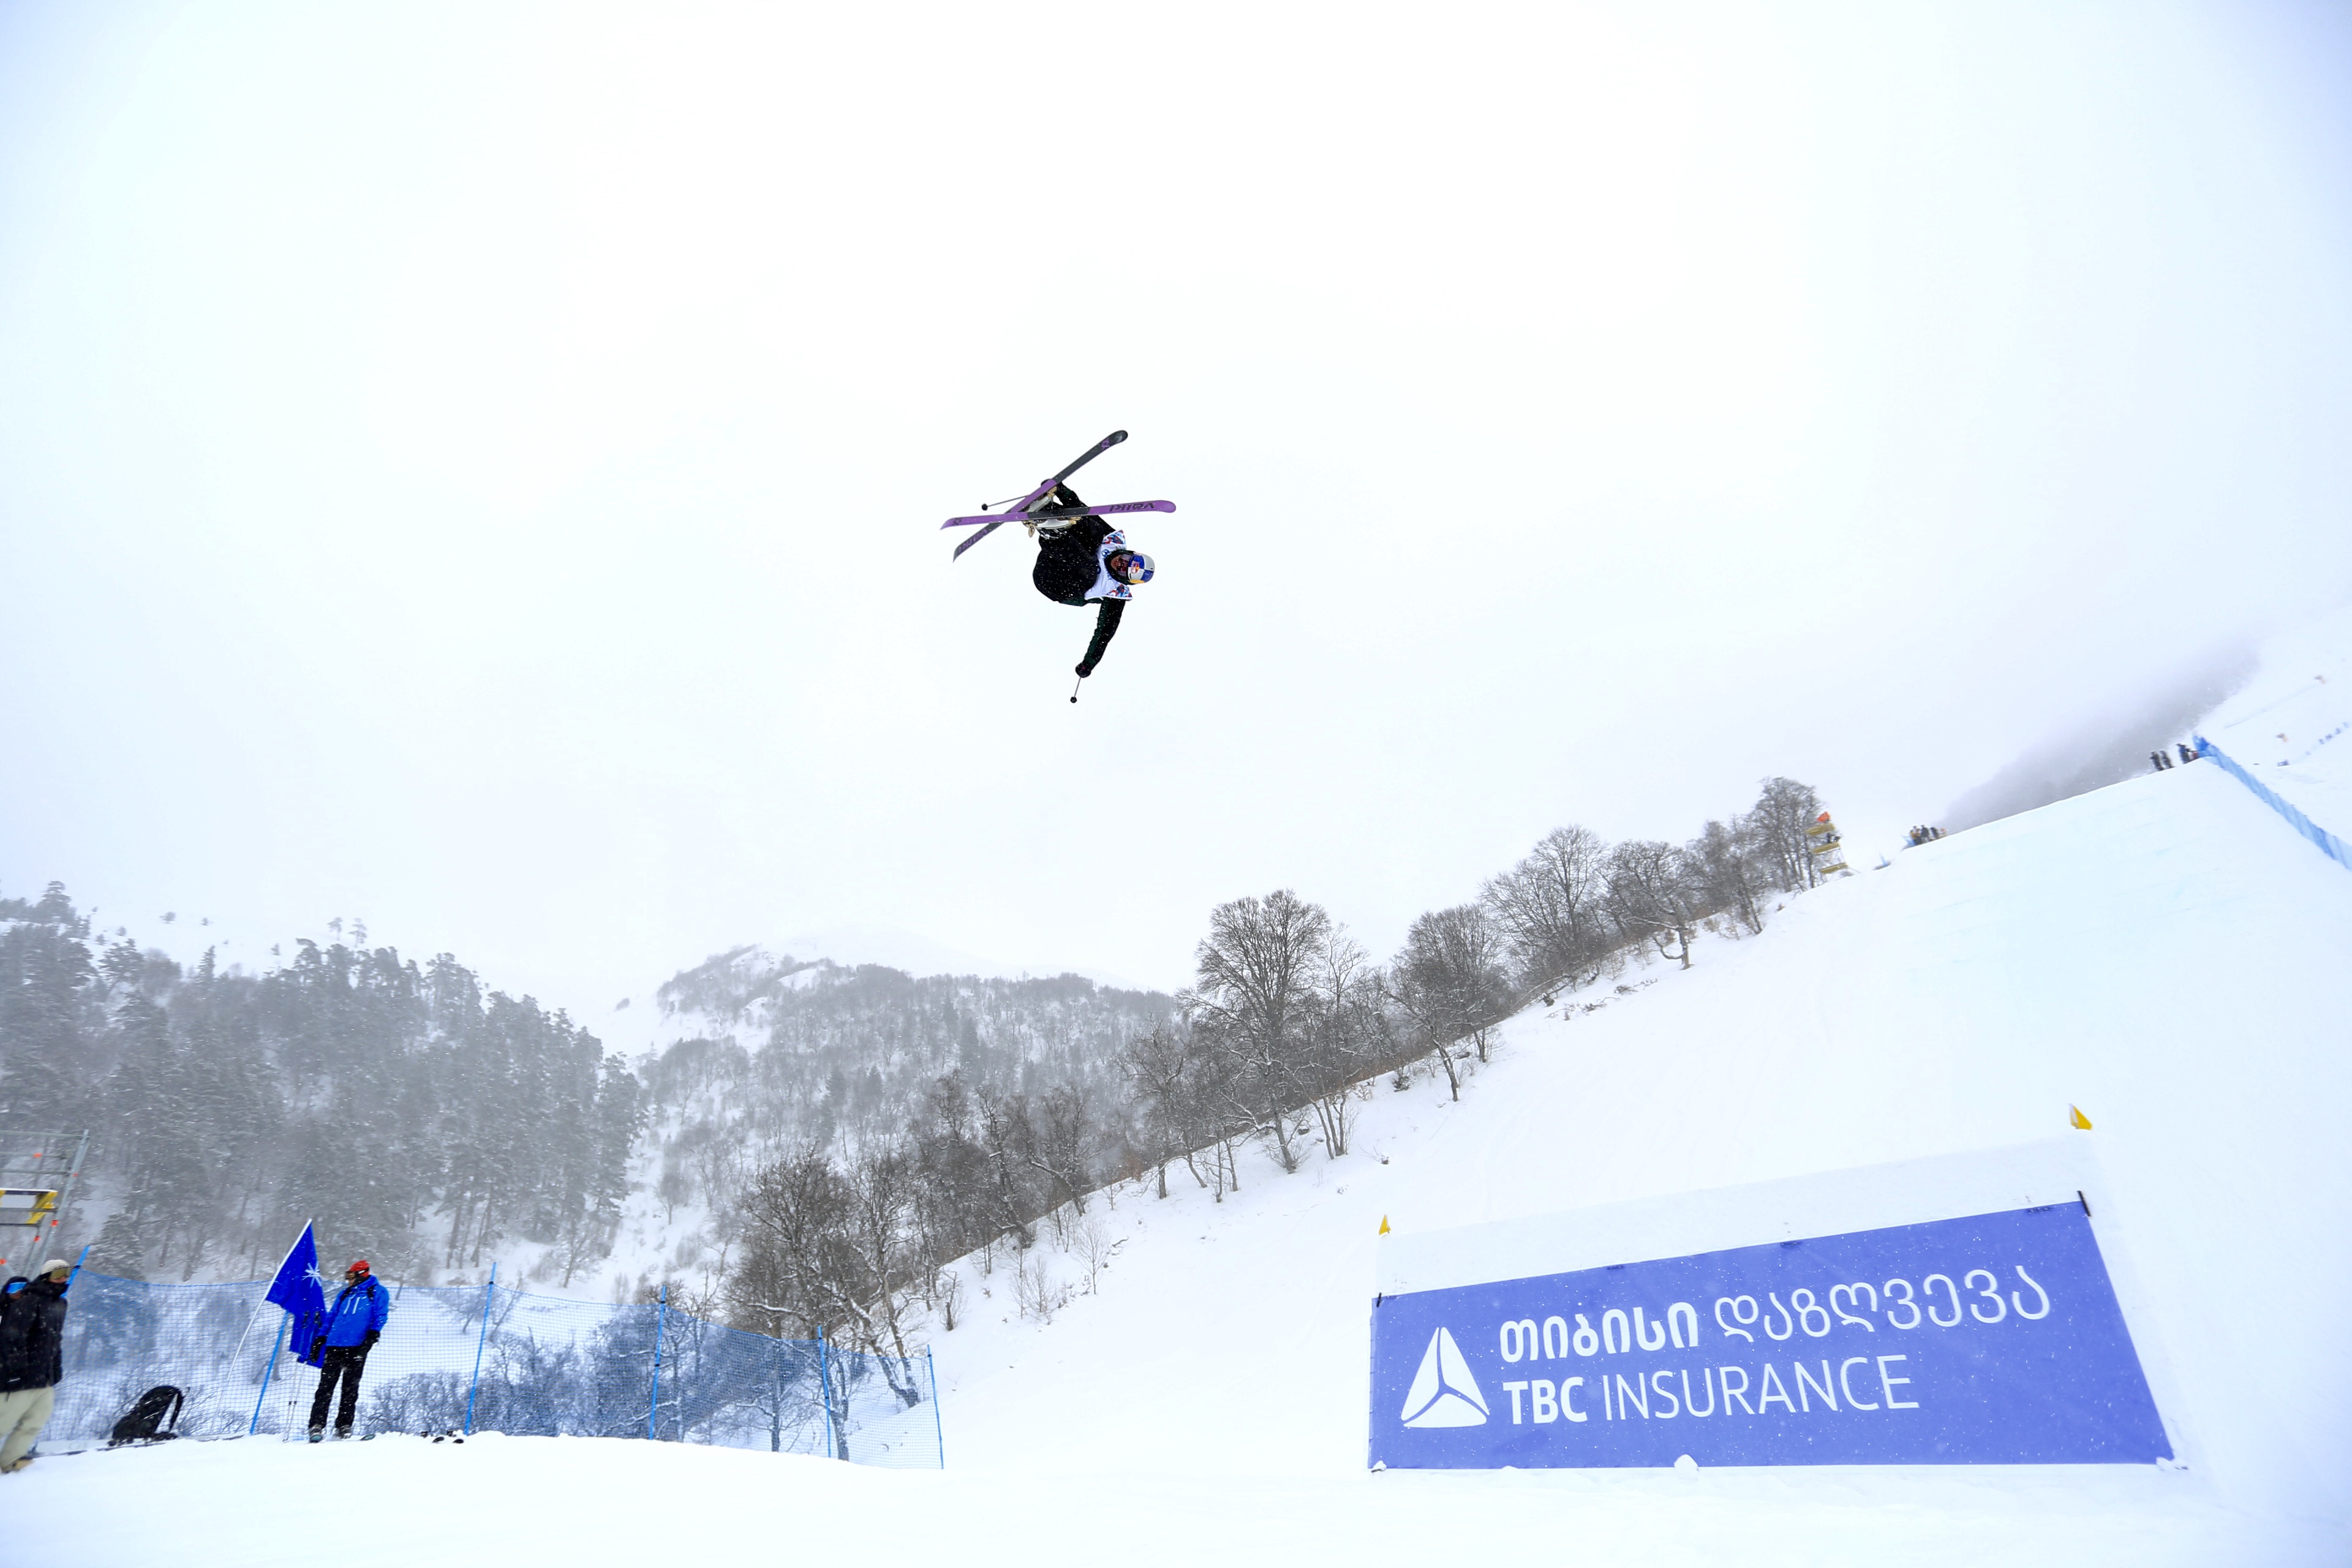 Hunter Henderson throws a trick off the third jump of the slopestyle course in Bakuriani, Georgia.